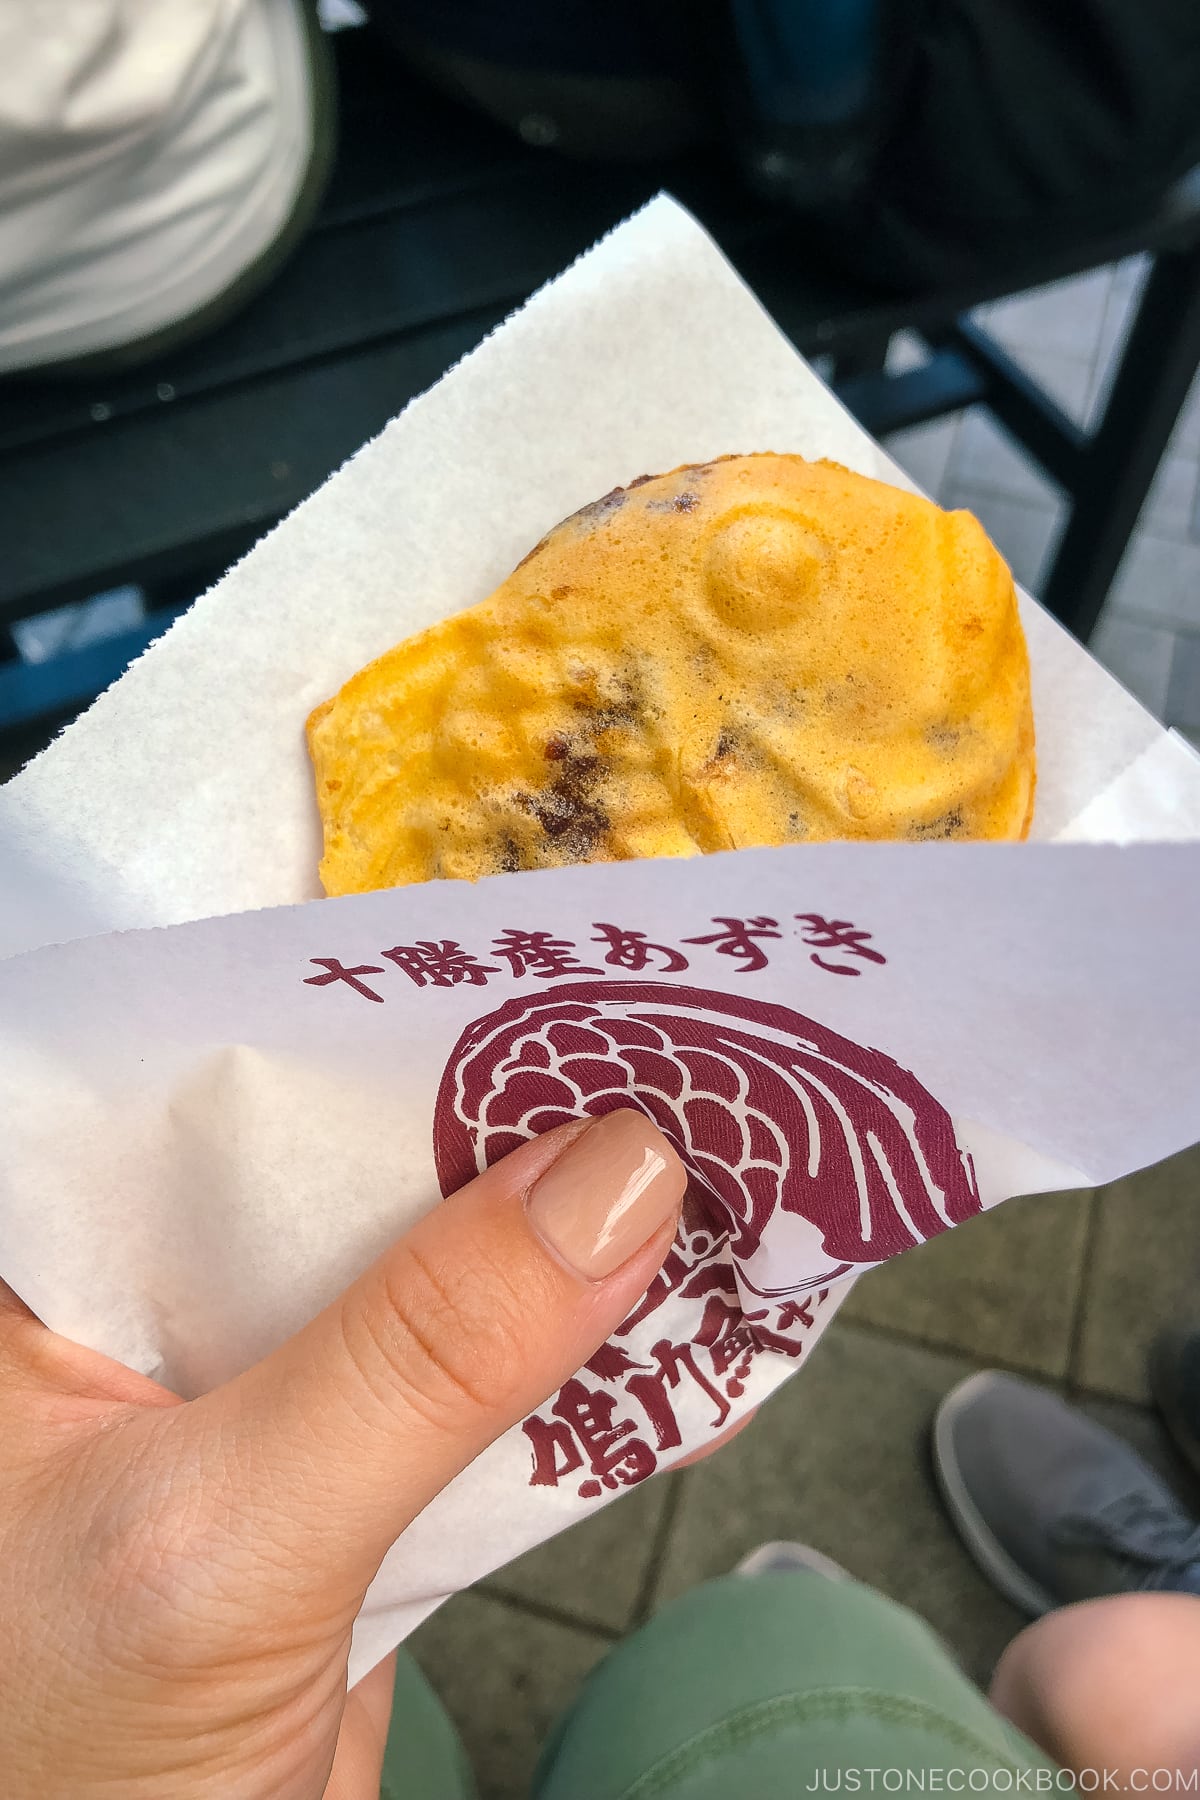 Taiyaki wrapped in a paper, from a Taiyaki shop in Tokyo, Japan.